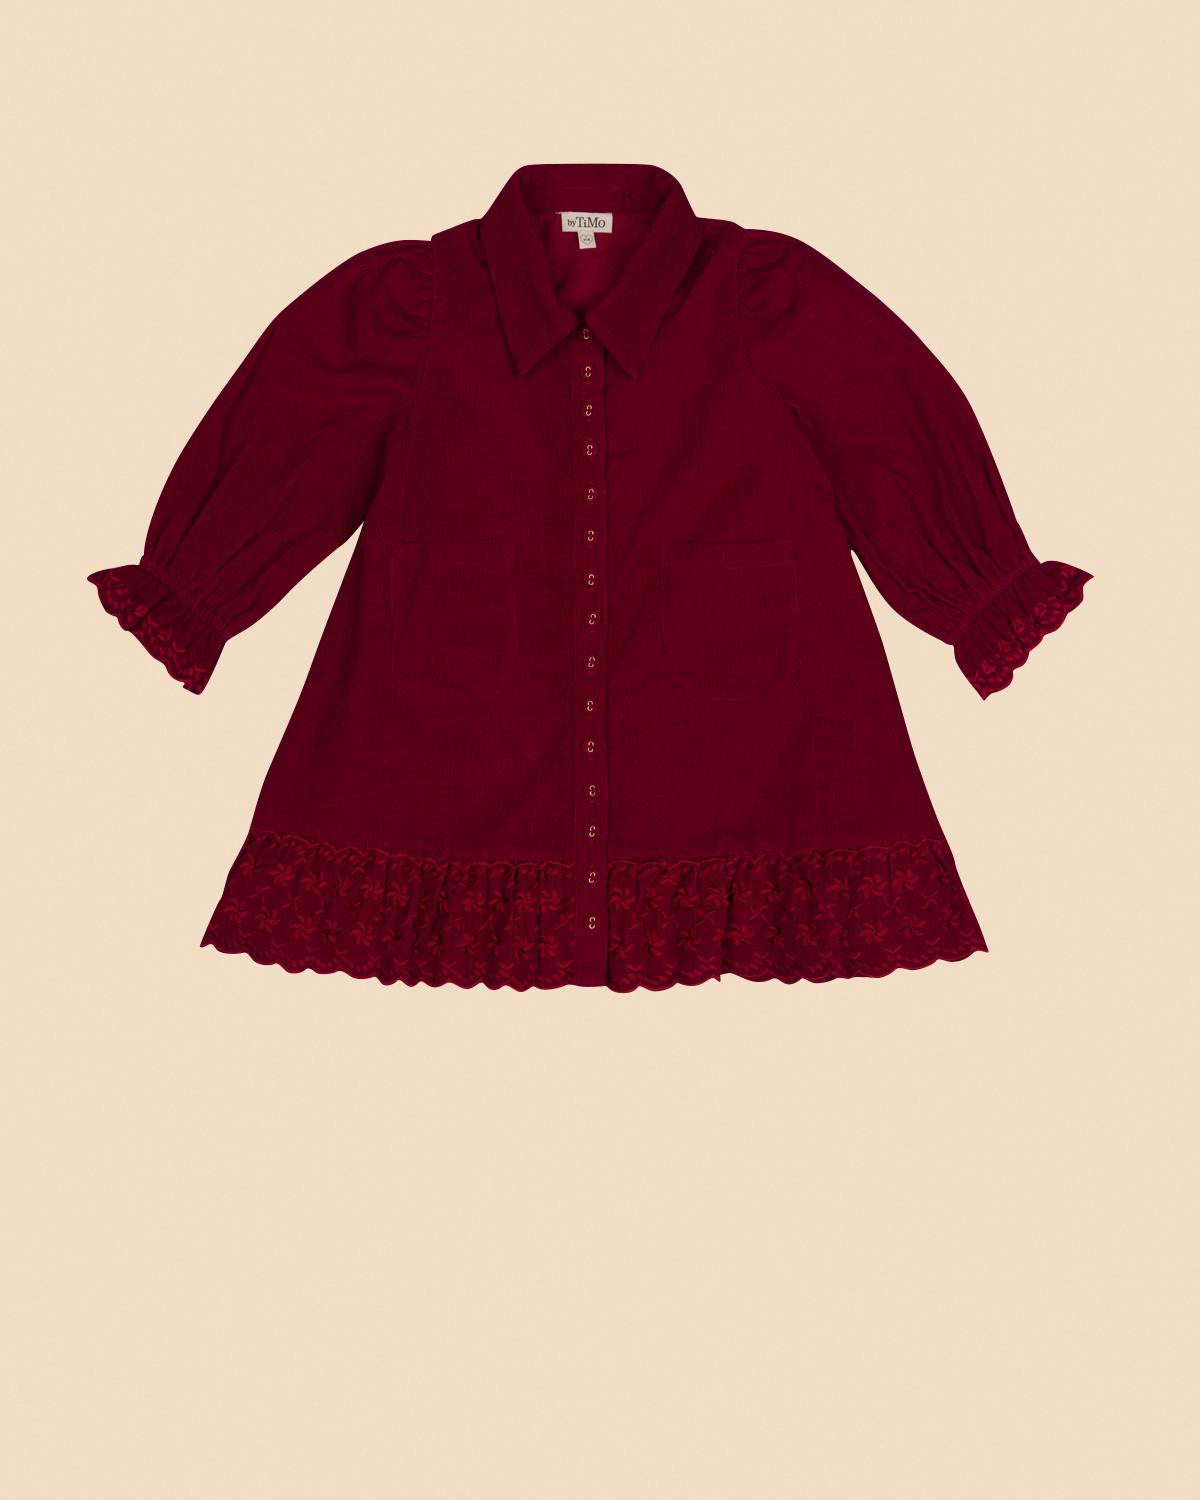 Baby Cord Button Down Dress, Burgundy (6M-5 years). Image #1